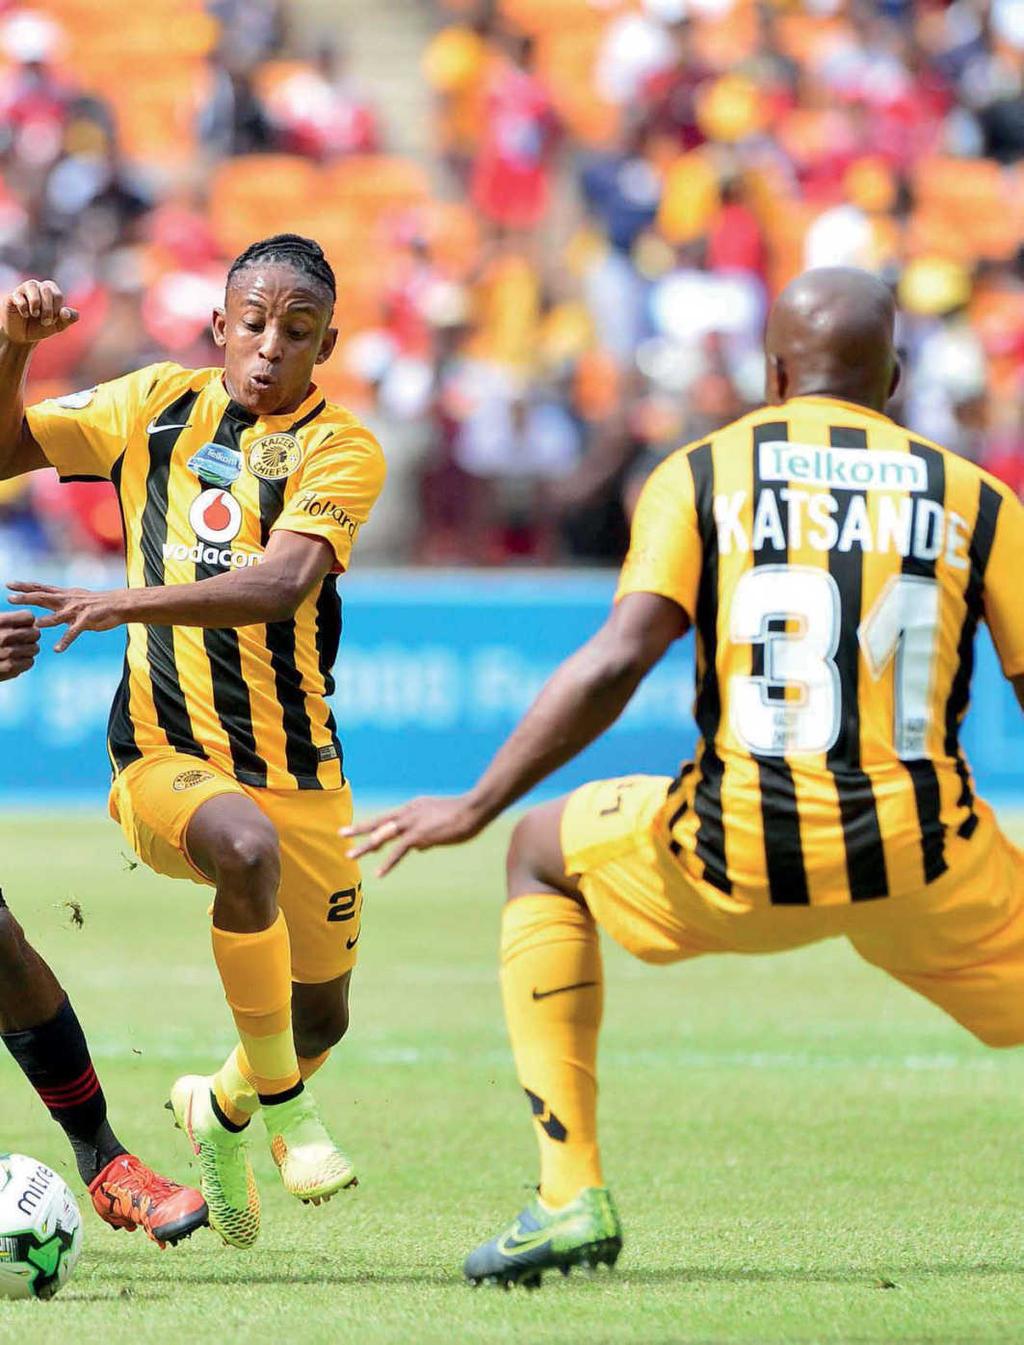 BEST DERBY I VE WATCHED... Kaizer Chiefs Supporters Siza Shabbinho Mnguni This was the first of the two massacres: 3-1 in the League and 3-0 in the Cup!